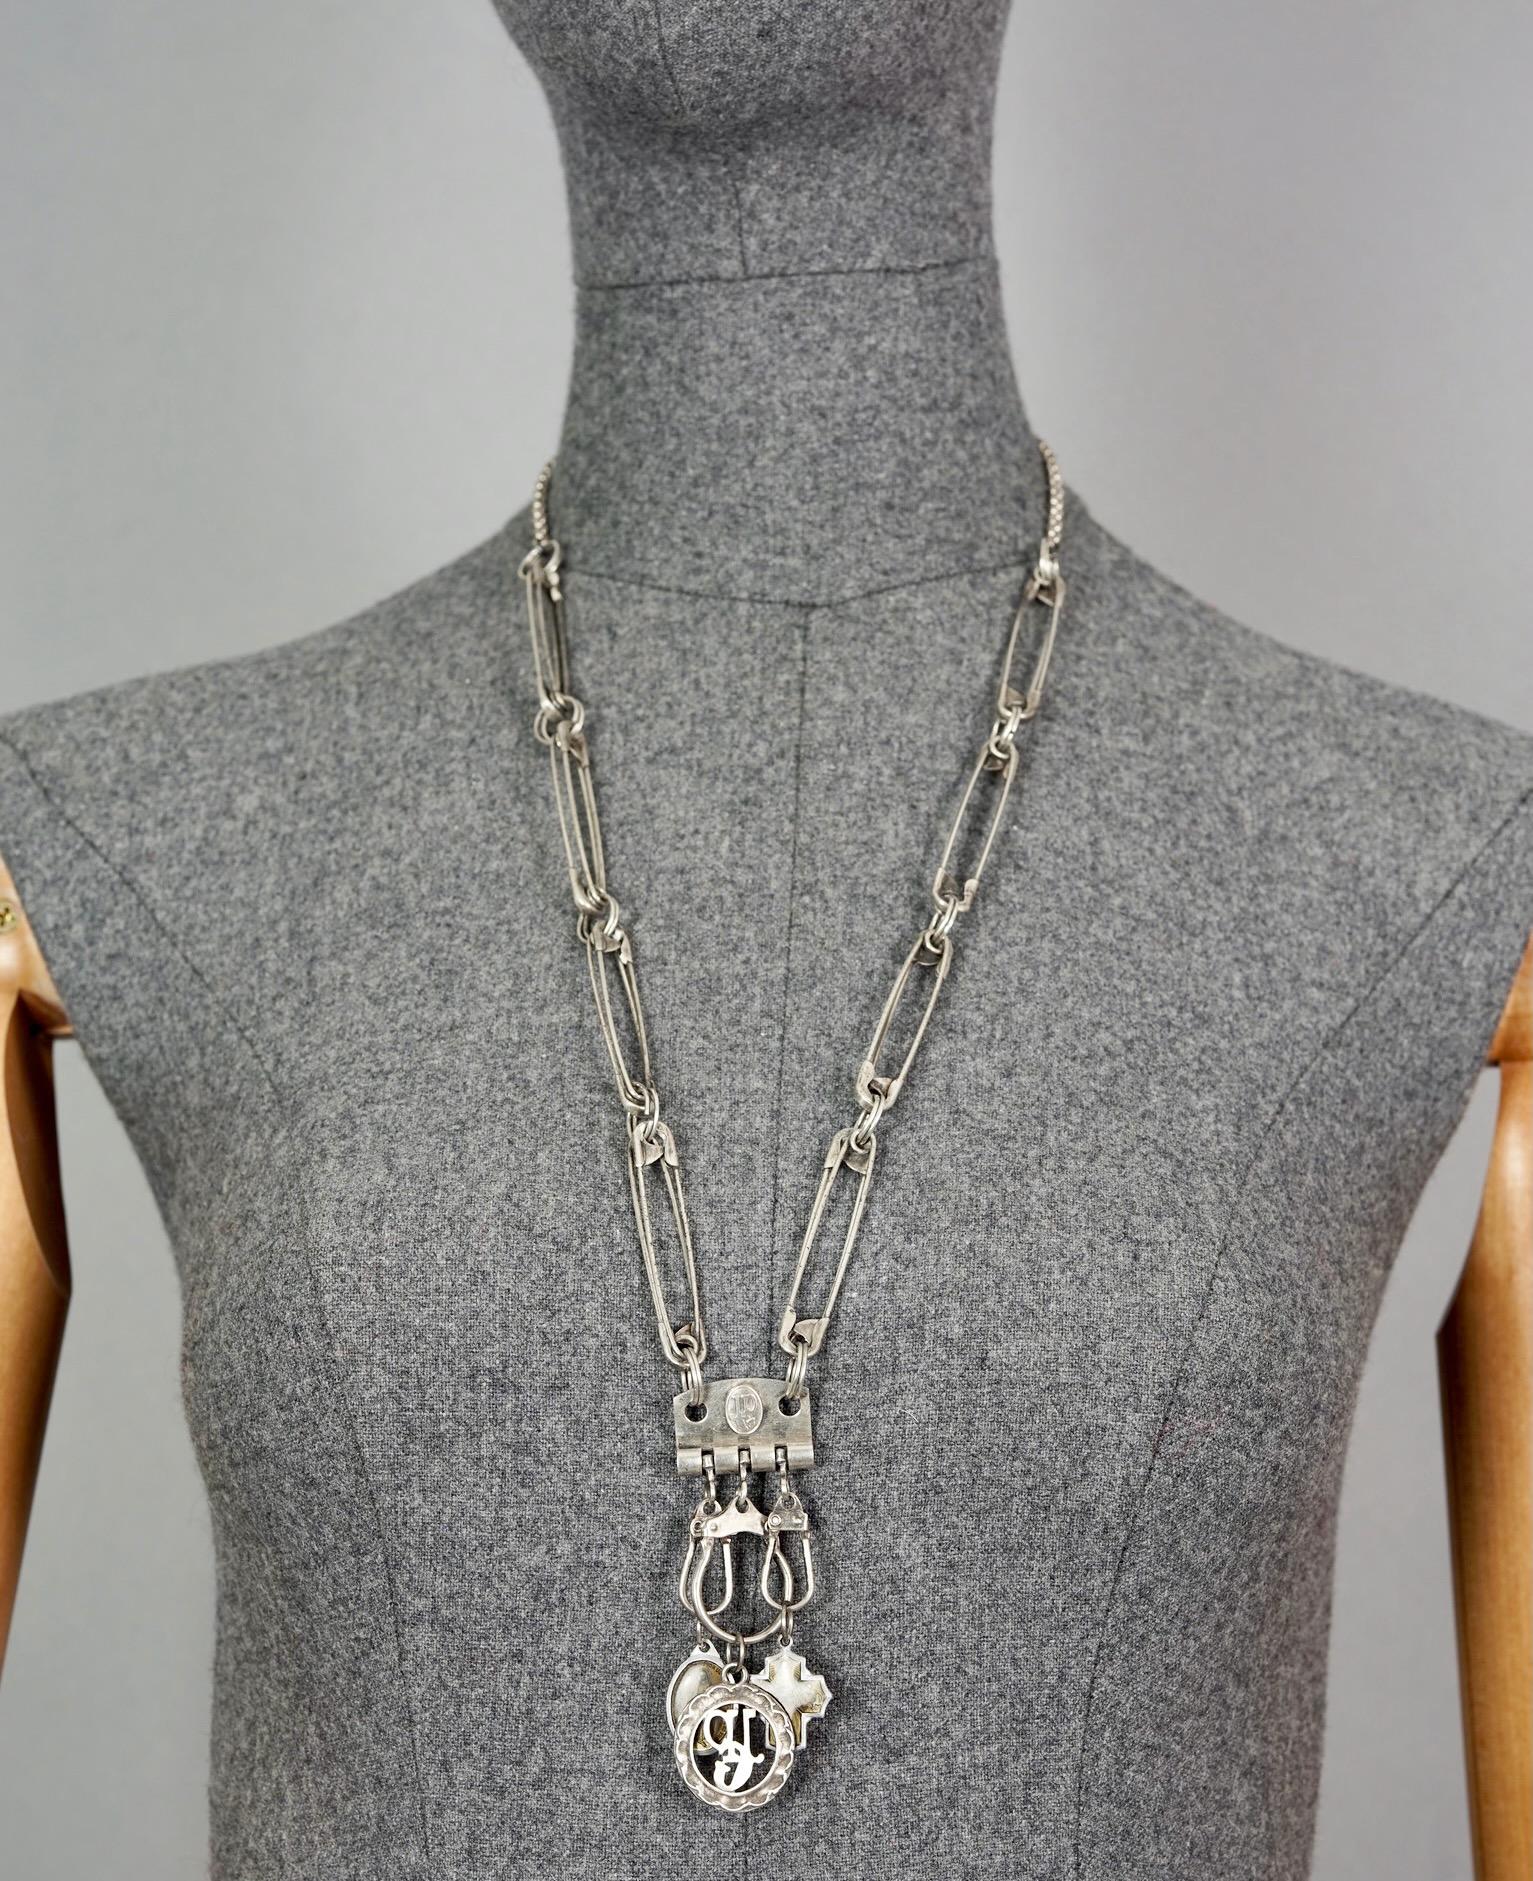 Vintage JEAN PAUL GAULTIER Safety Pin Logo Scapular Charm Necklace

Measurements:
Pendant Drop: 3.15 inches (8 cm)
Wearable Length: 27.56 inches (70 cm)

Features:
- 100% Authentic JEAN PAUL GAULTIER.
- Safety pin links with scapular and JPG